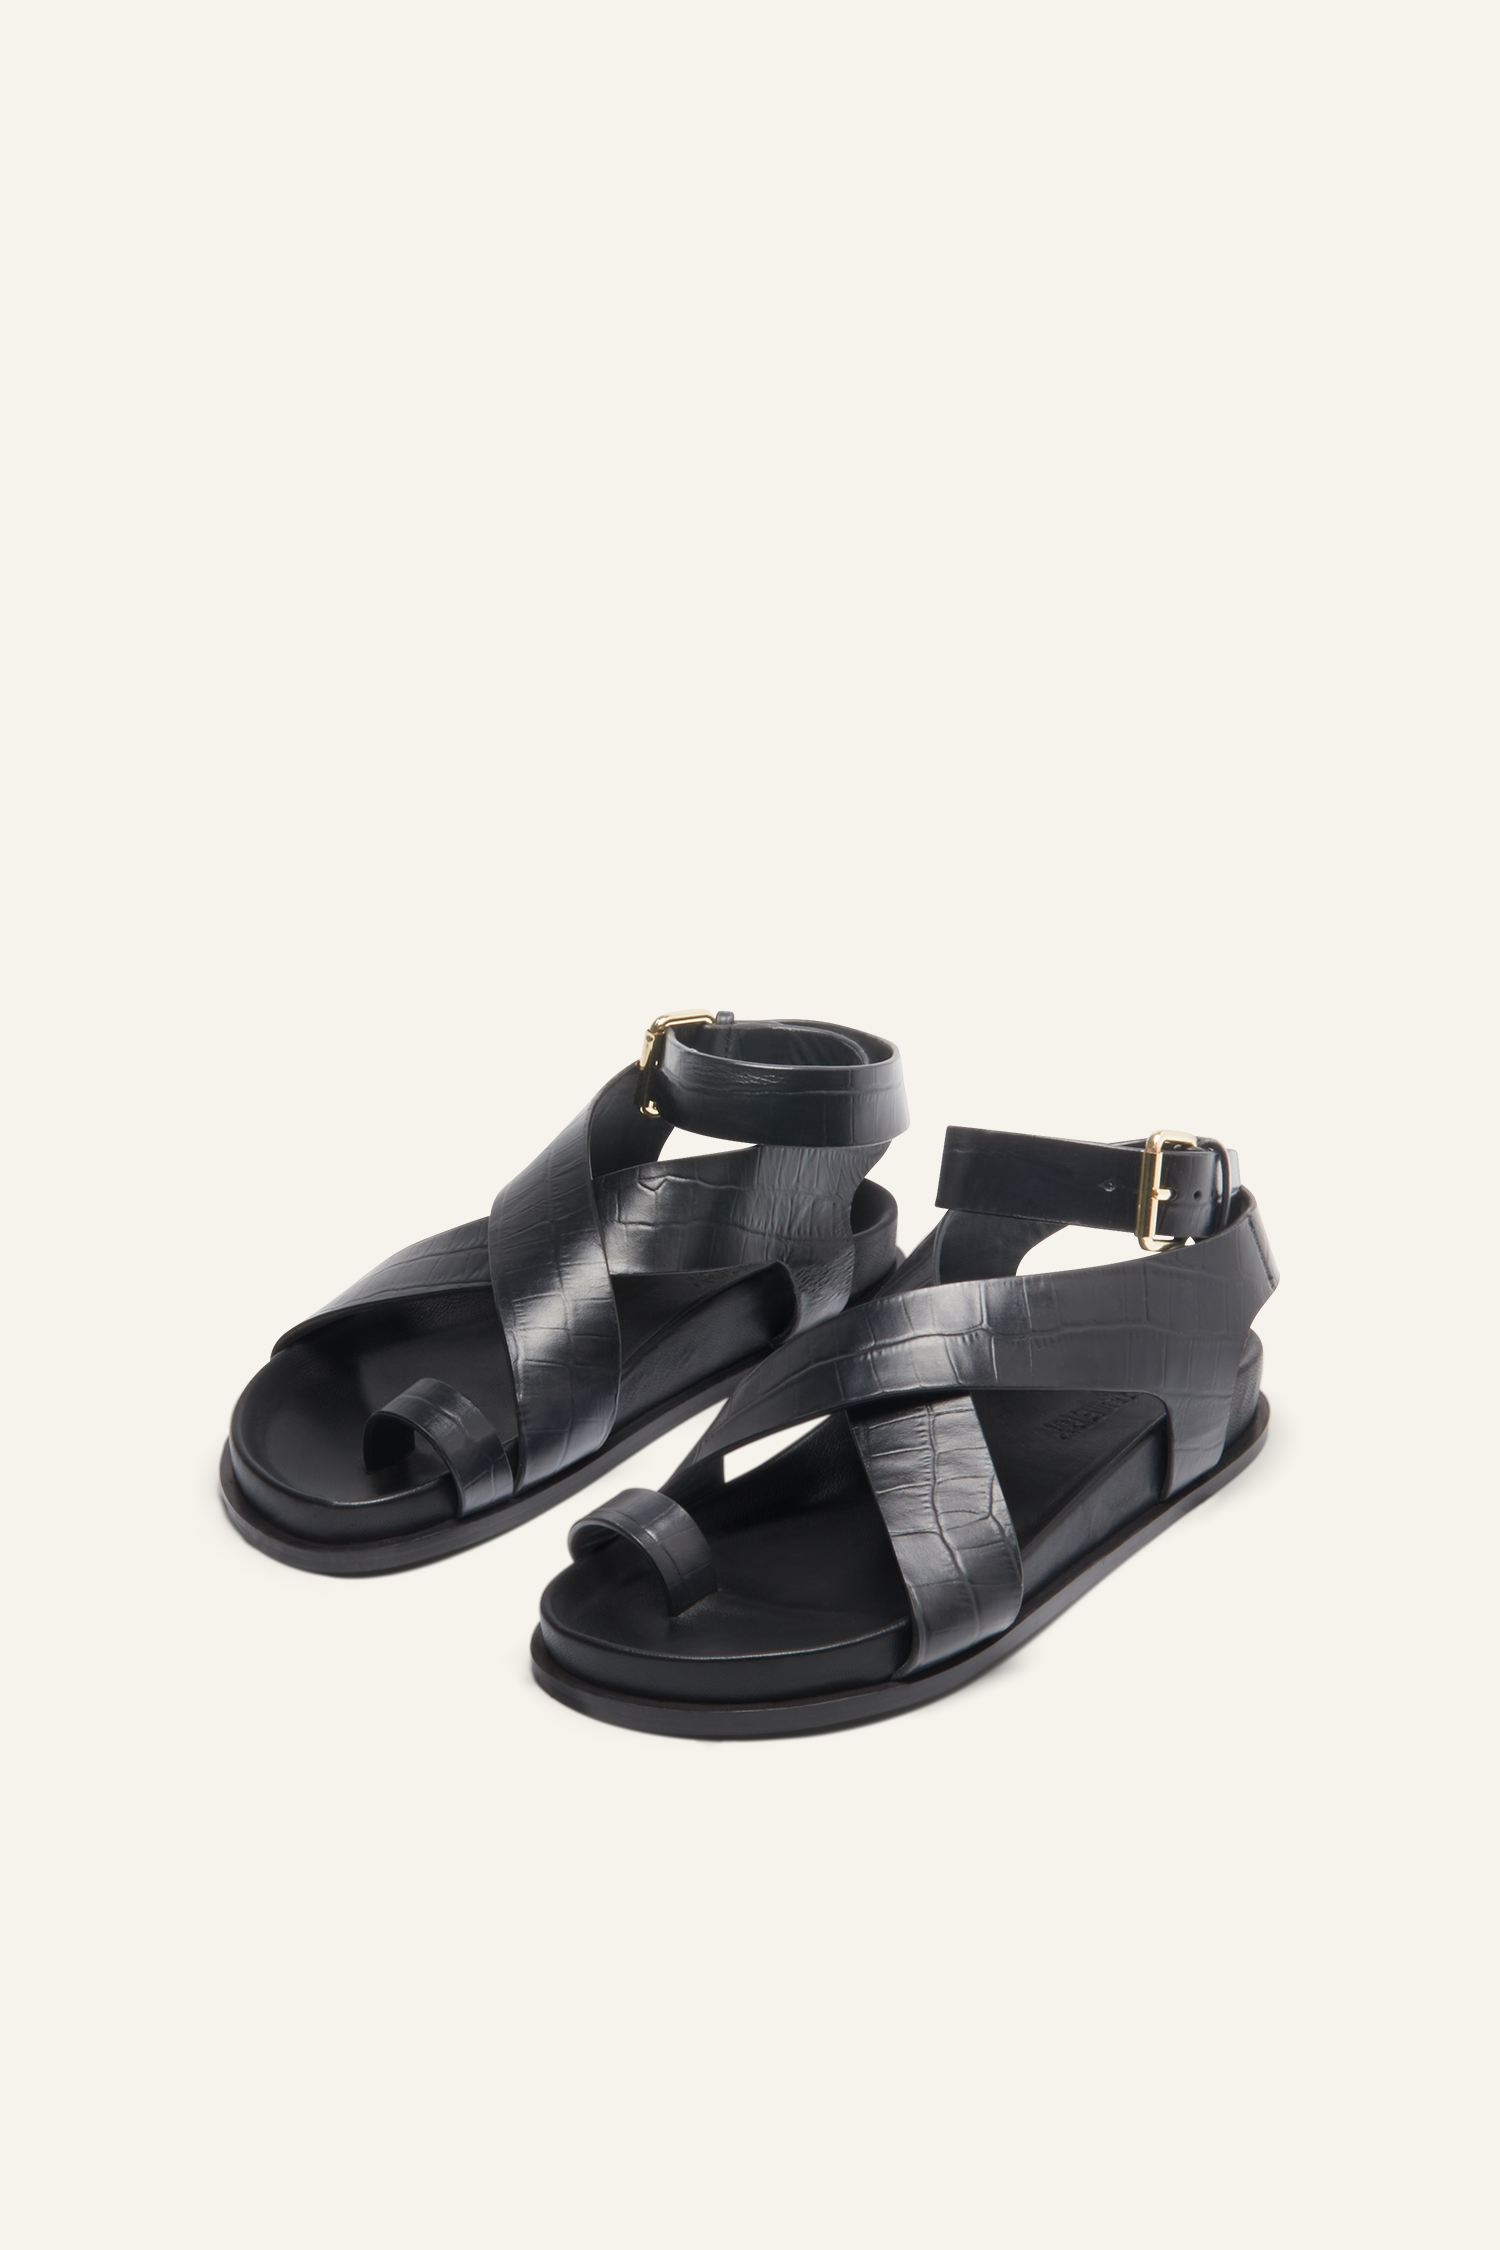 A.Emery Jalen Sandal in Black Croc from The New Trend 